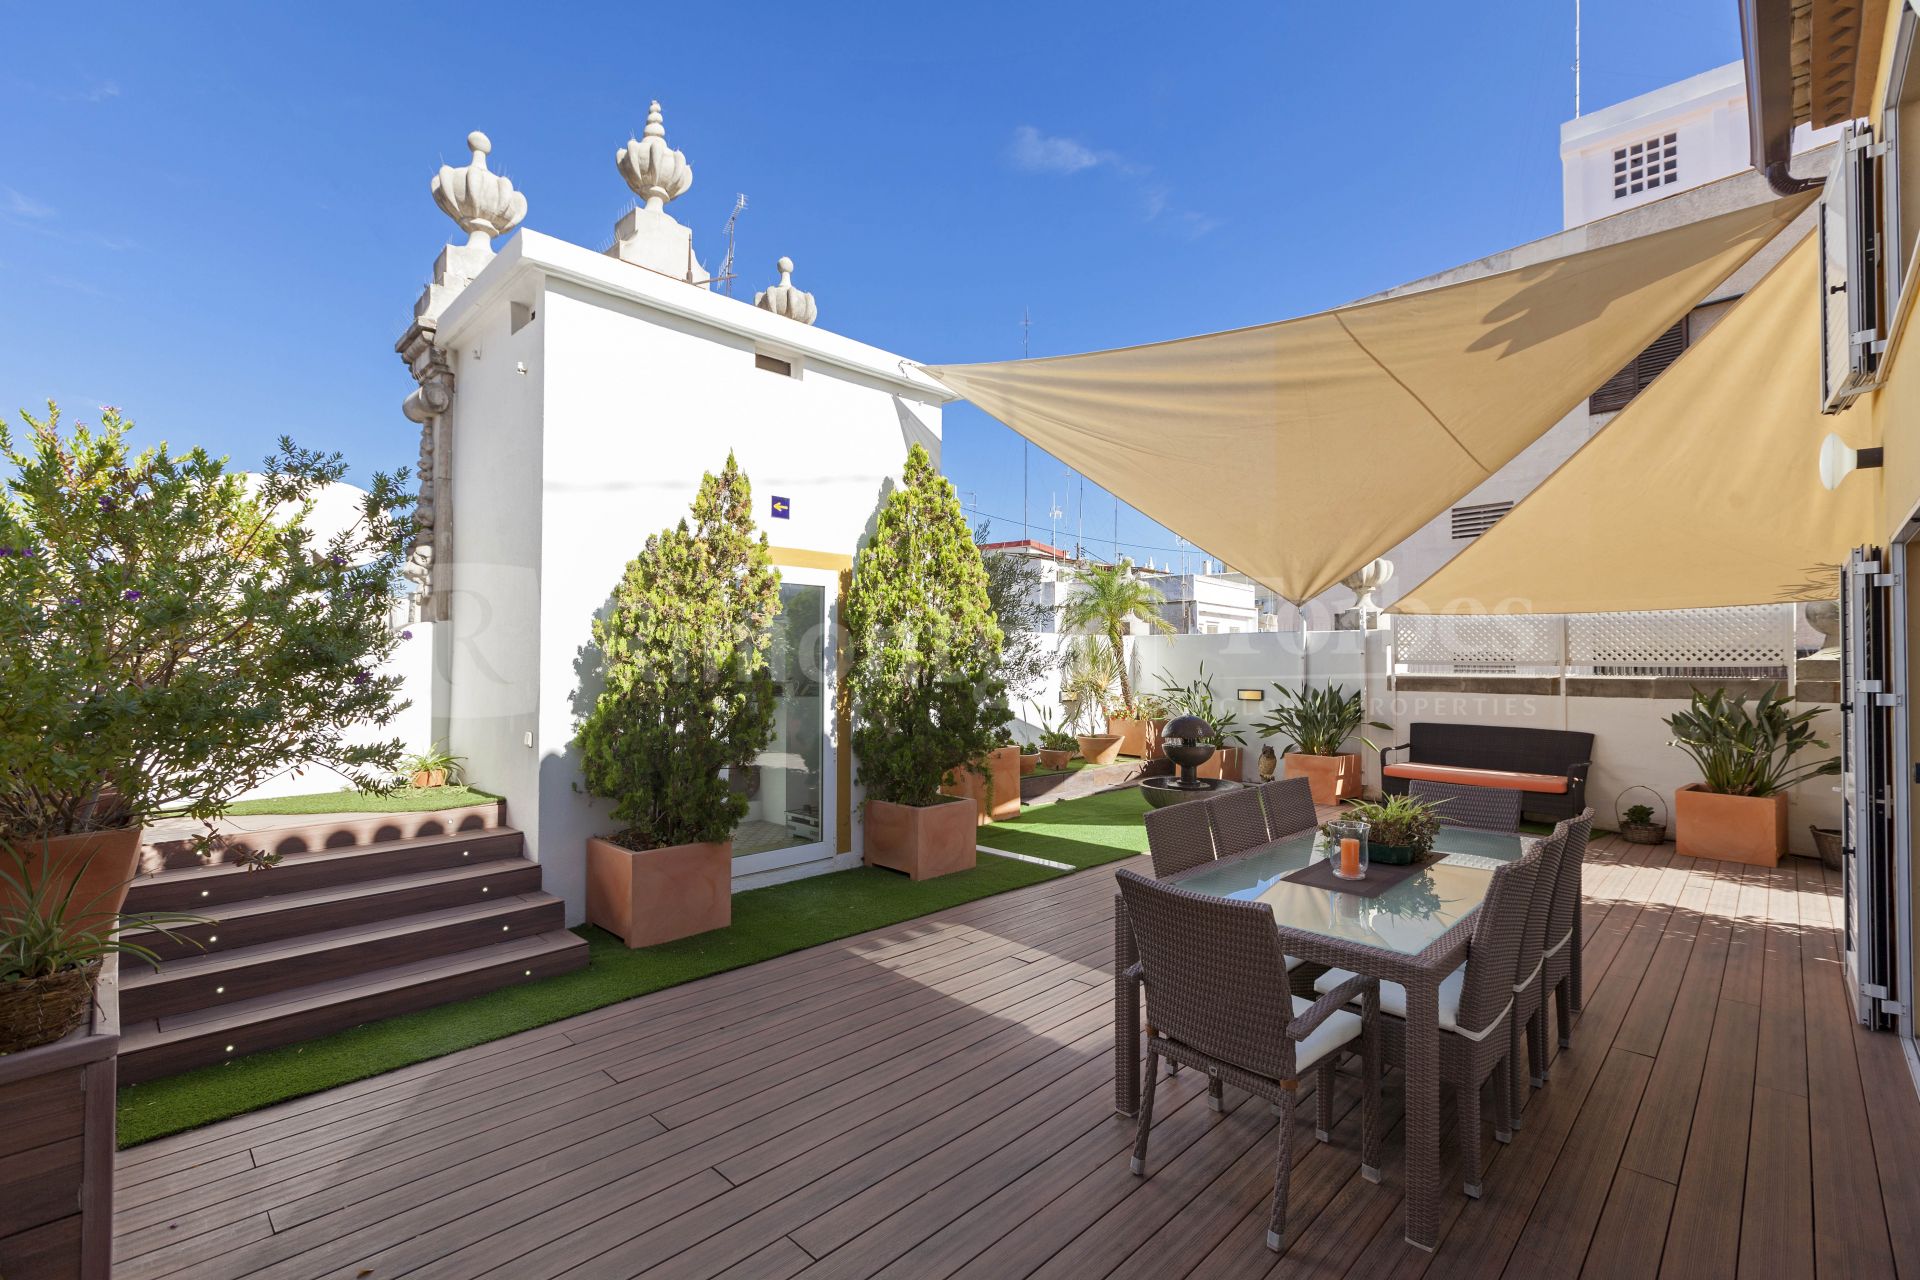 Impressive penthouse with fantastic views for sale next to the Mercado Central in Valencia.